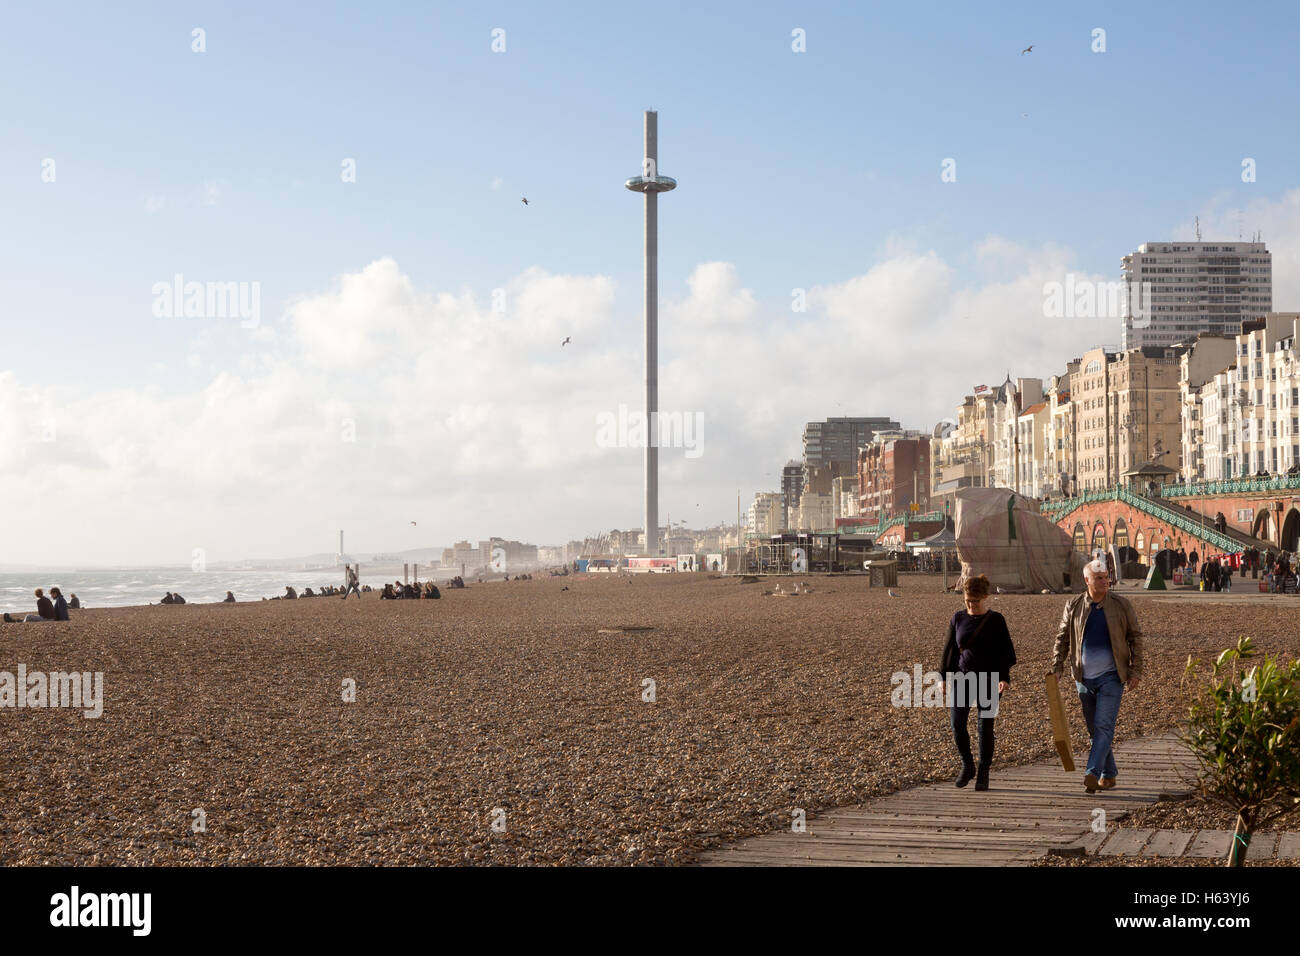 People walking on Brighton promenade, with the i360 observation tower in the background, Brighton, East Sussex UK Stock Photo